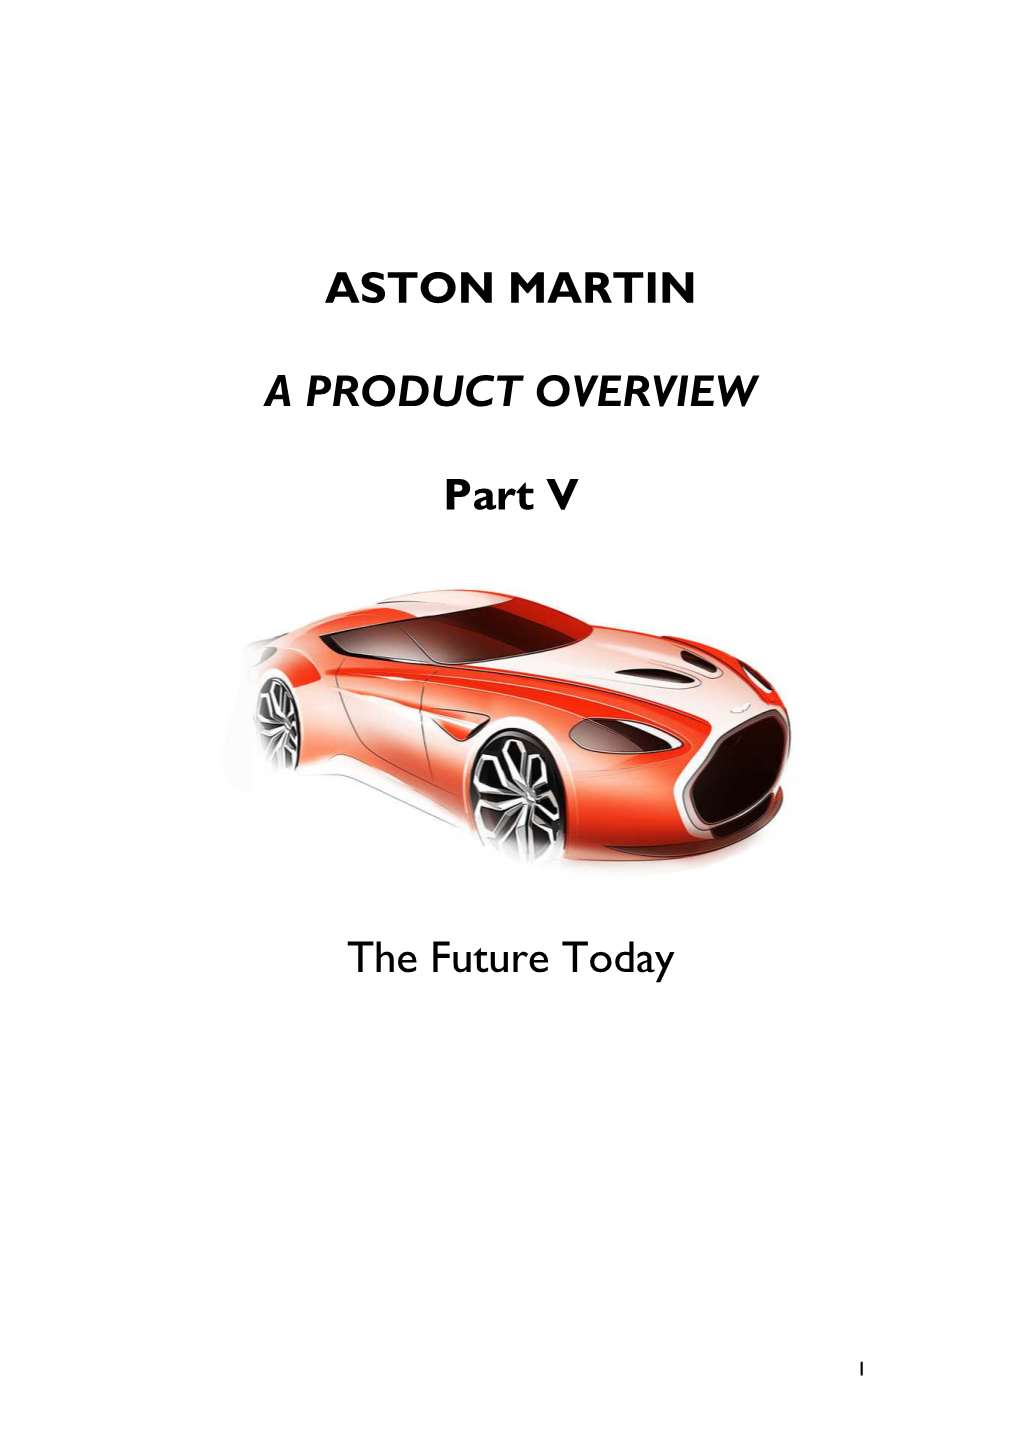 ASTON MARTIN a PRODUCT OVERVIEW Part V the Future Today